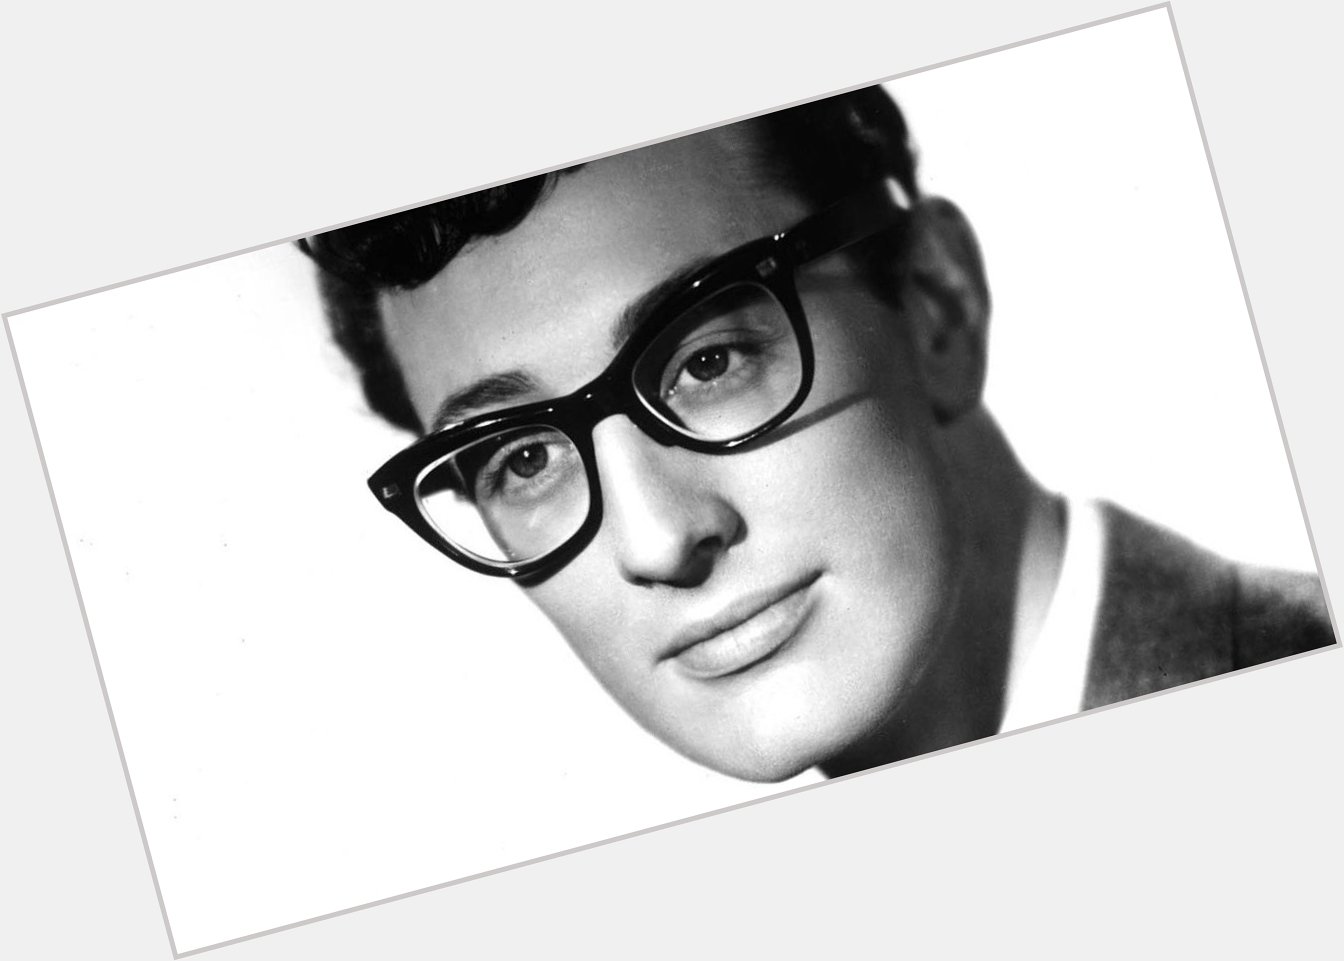 Happy birthday Buddy Holly. You left this world at just 22, but your songs will always live on.     